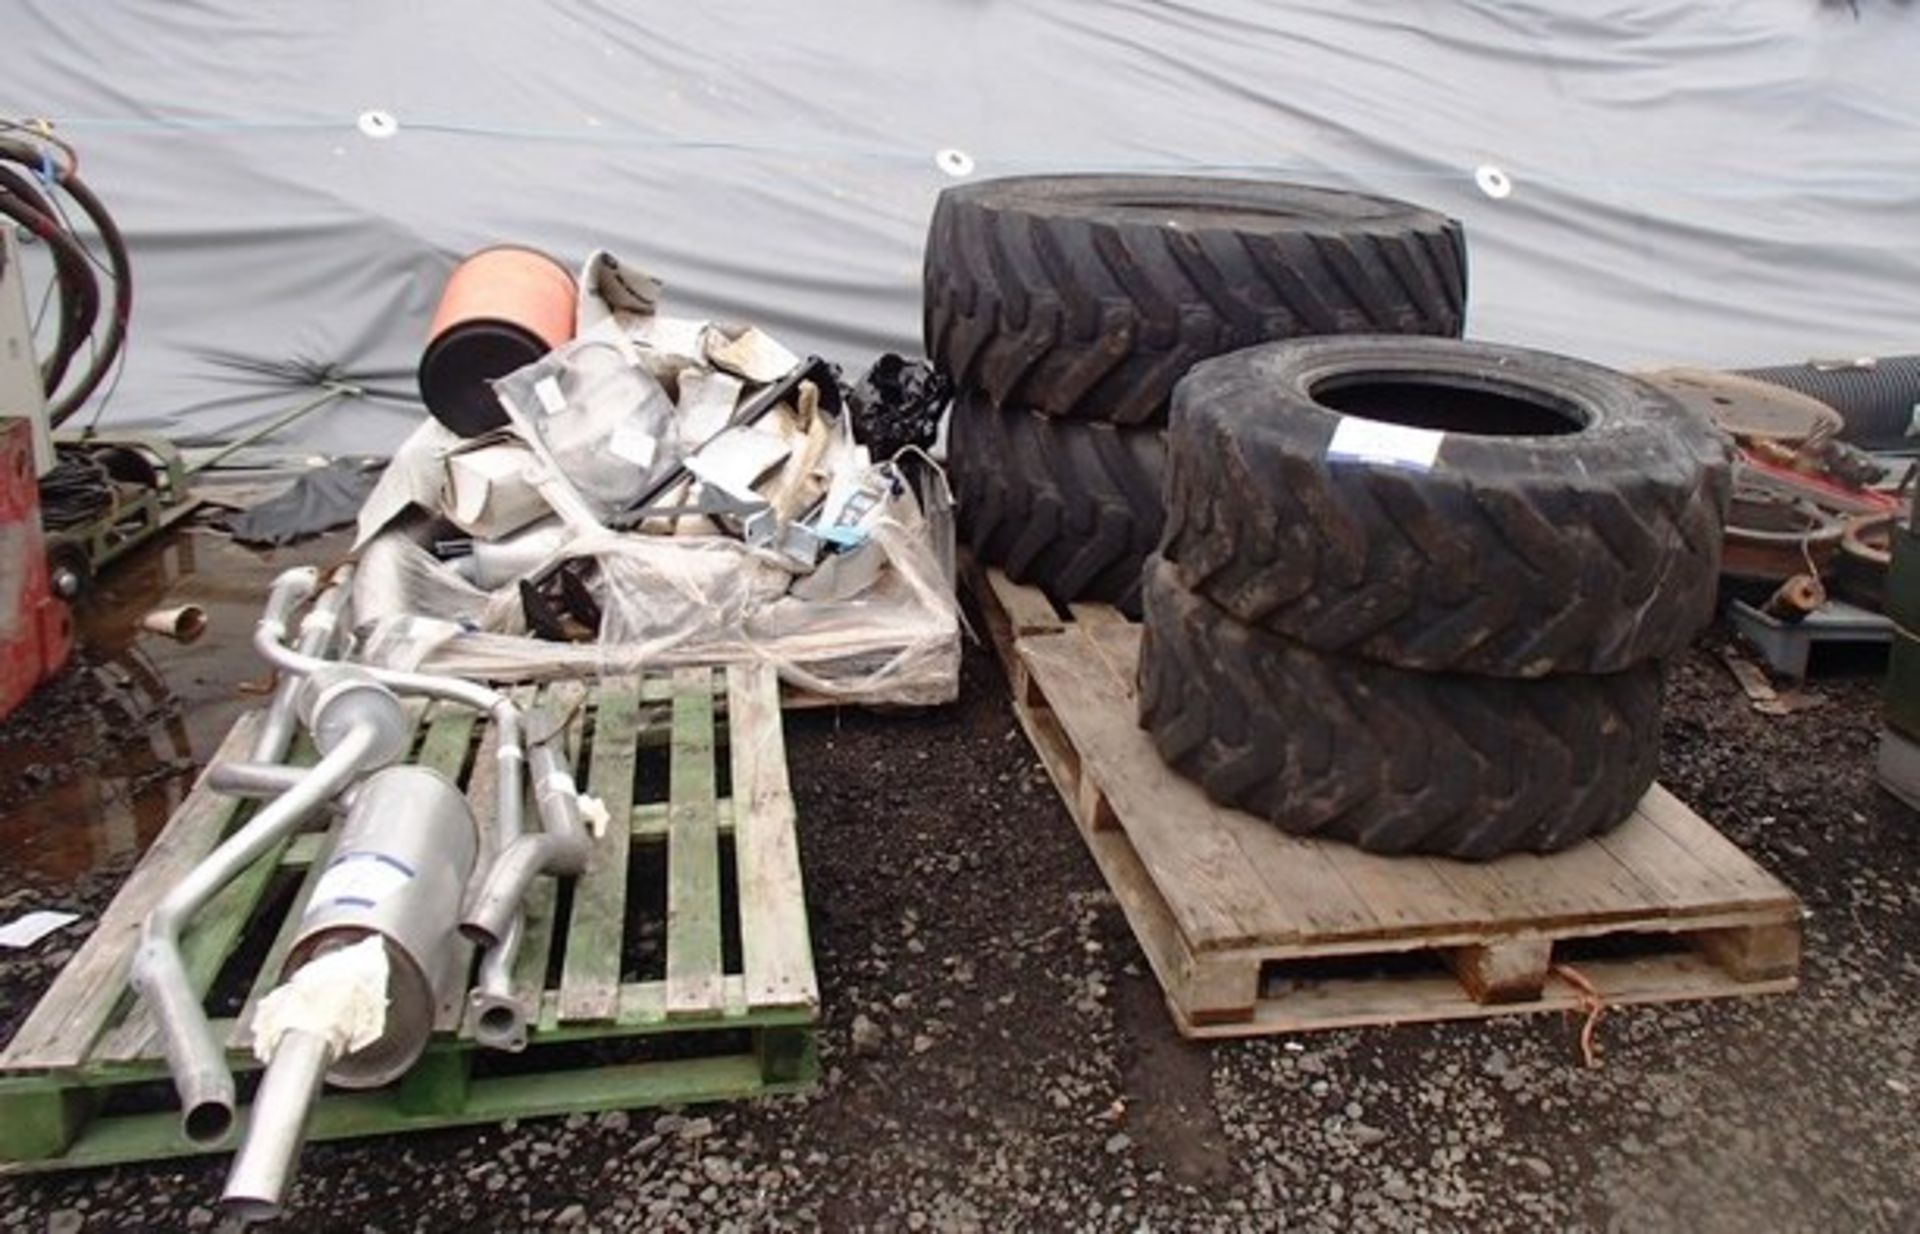 NO 5 EXHAUSTS, PALLET NO 11 VARIOUS TRUCK PARTS, PART WORN TYRES (PAIR) MICHELIN POWER CL SIZE 340/